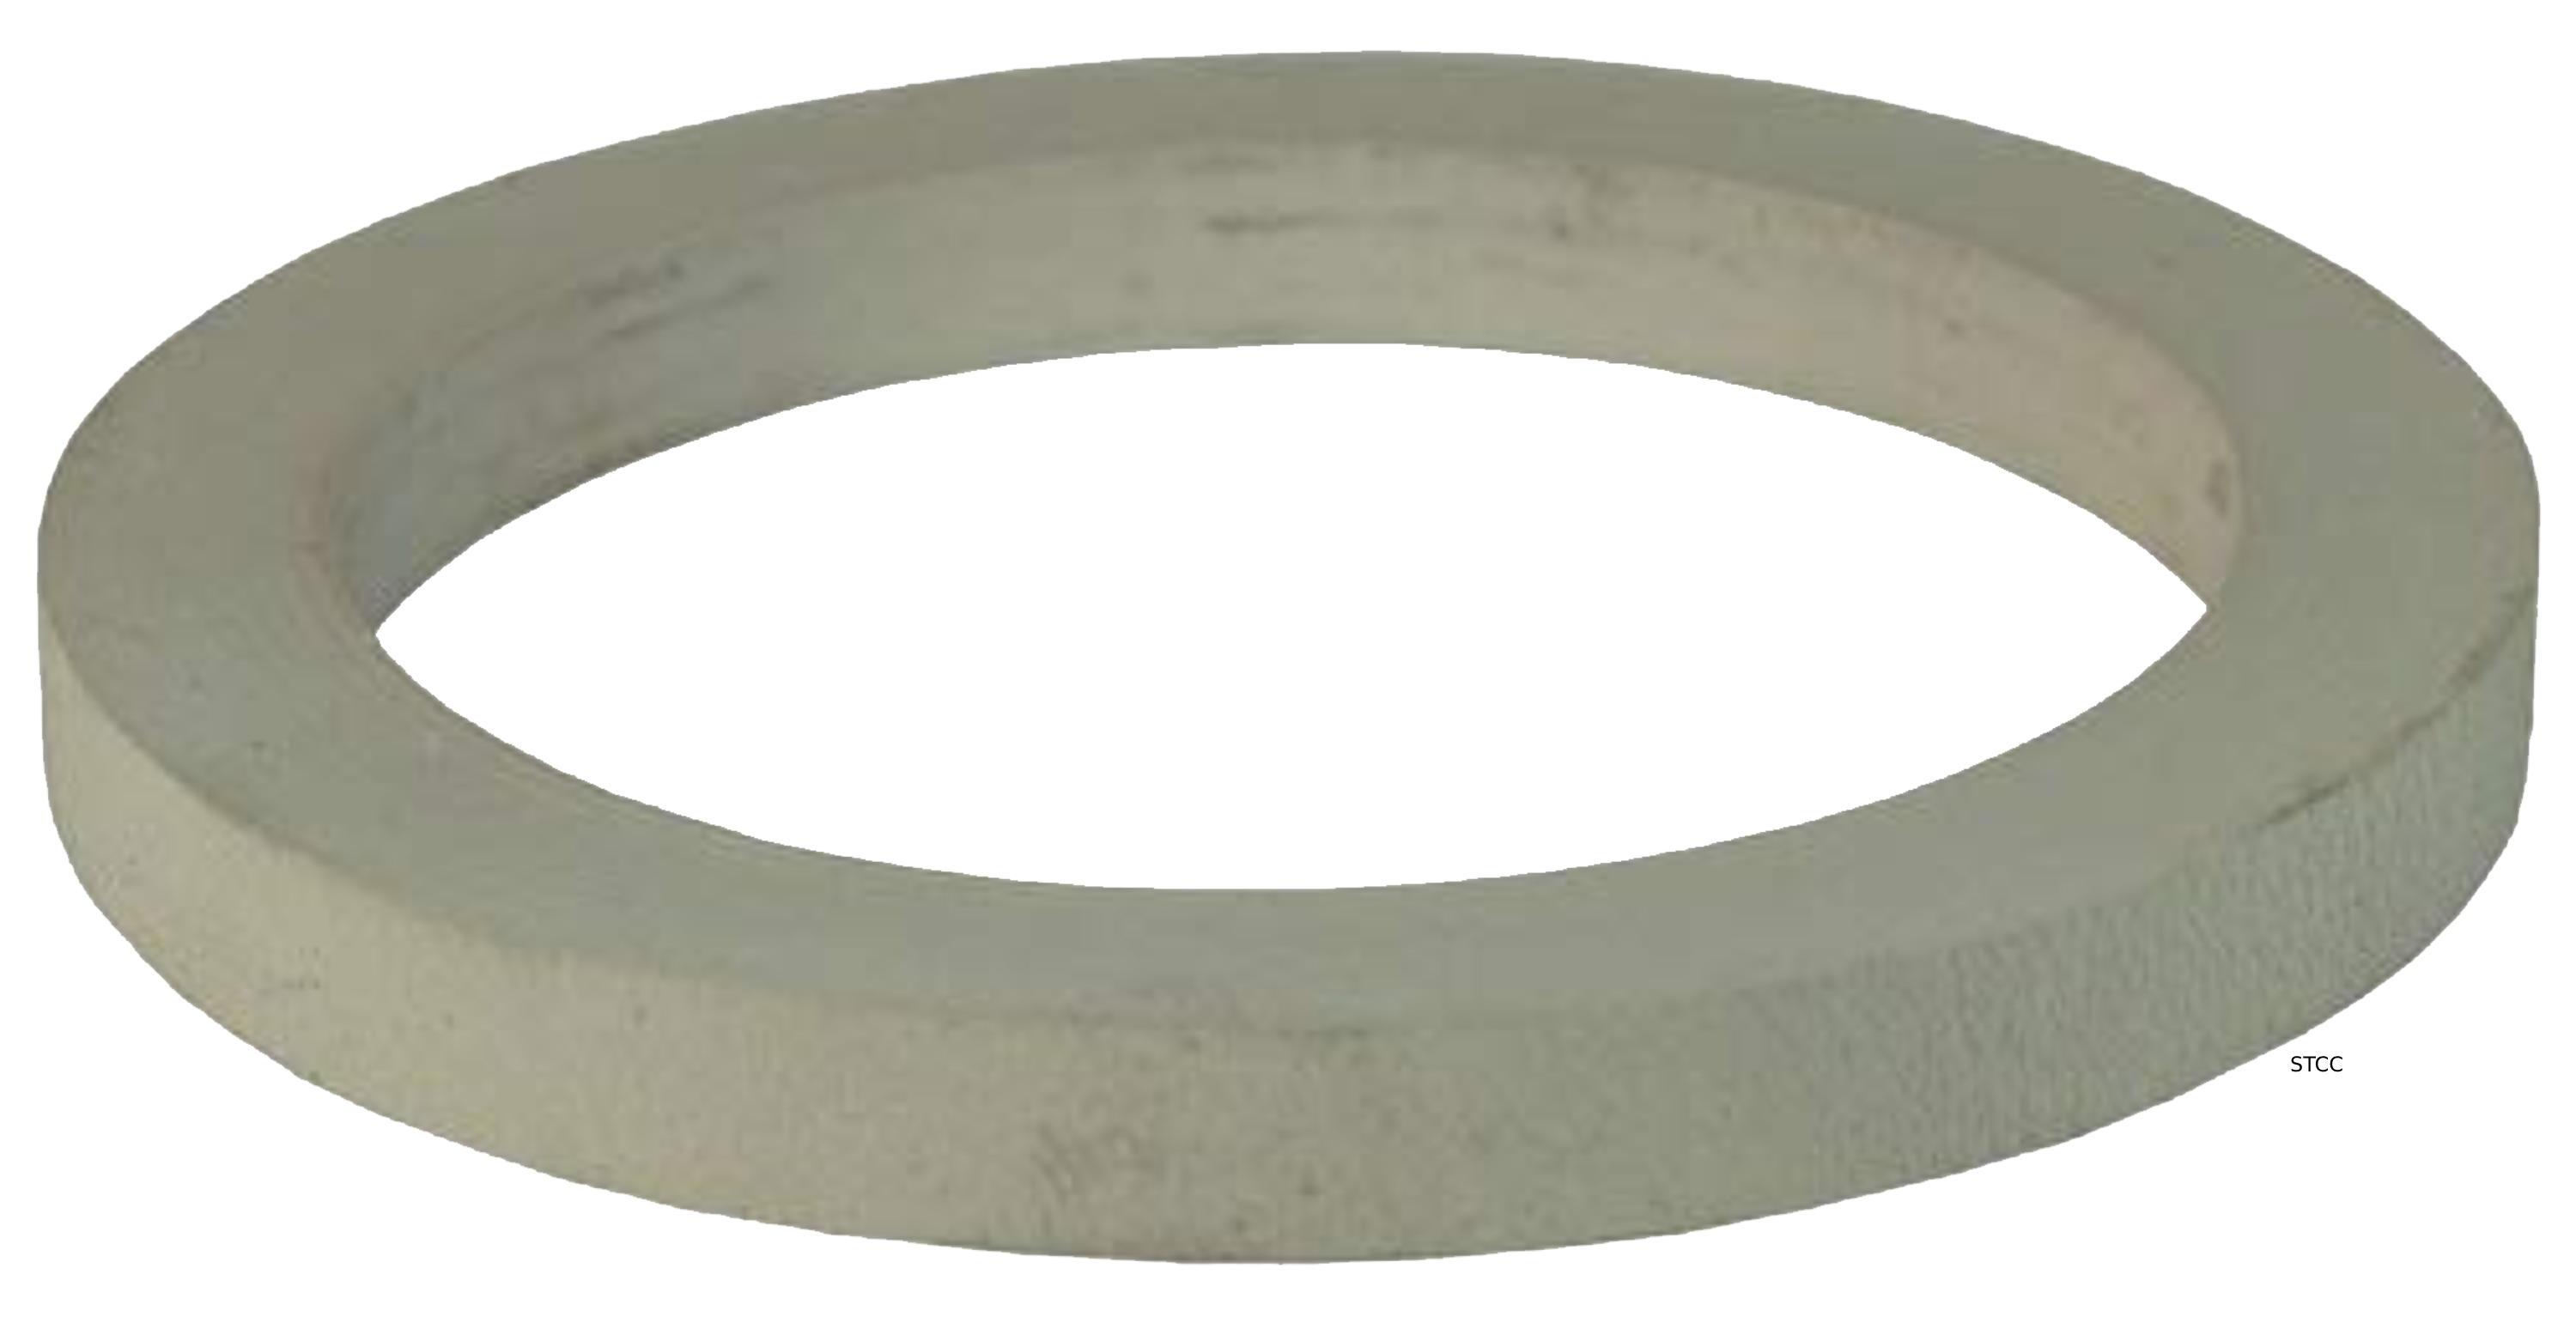 Sterling Seal CRG7540.1200.031.300X50 7540 Vegetable Fiber Ring Gasket 12 Pipe Size 1/32 Thick Pressure Class 300# Pack of 50 Tan